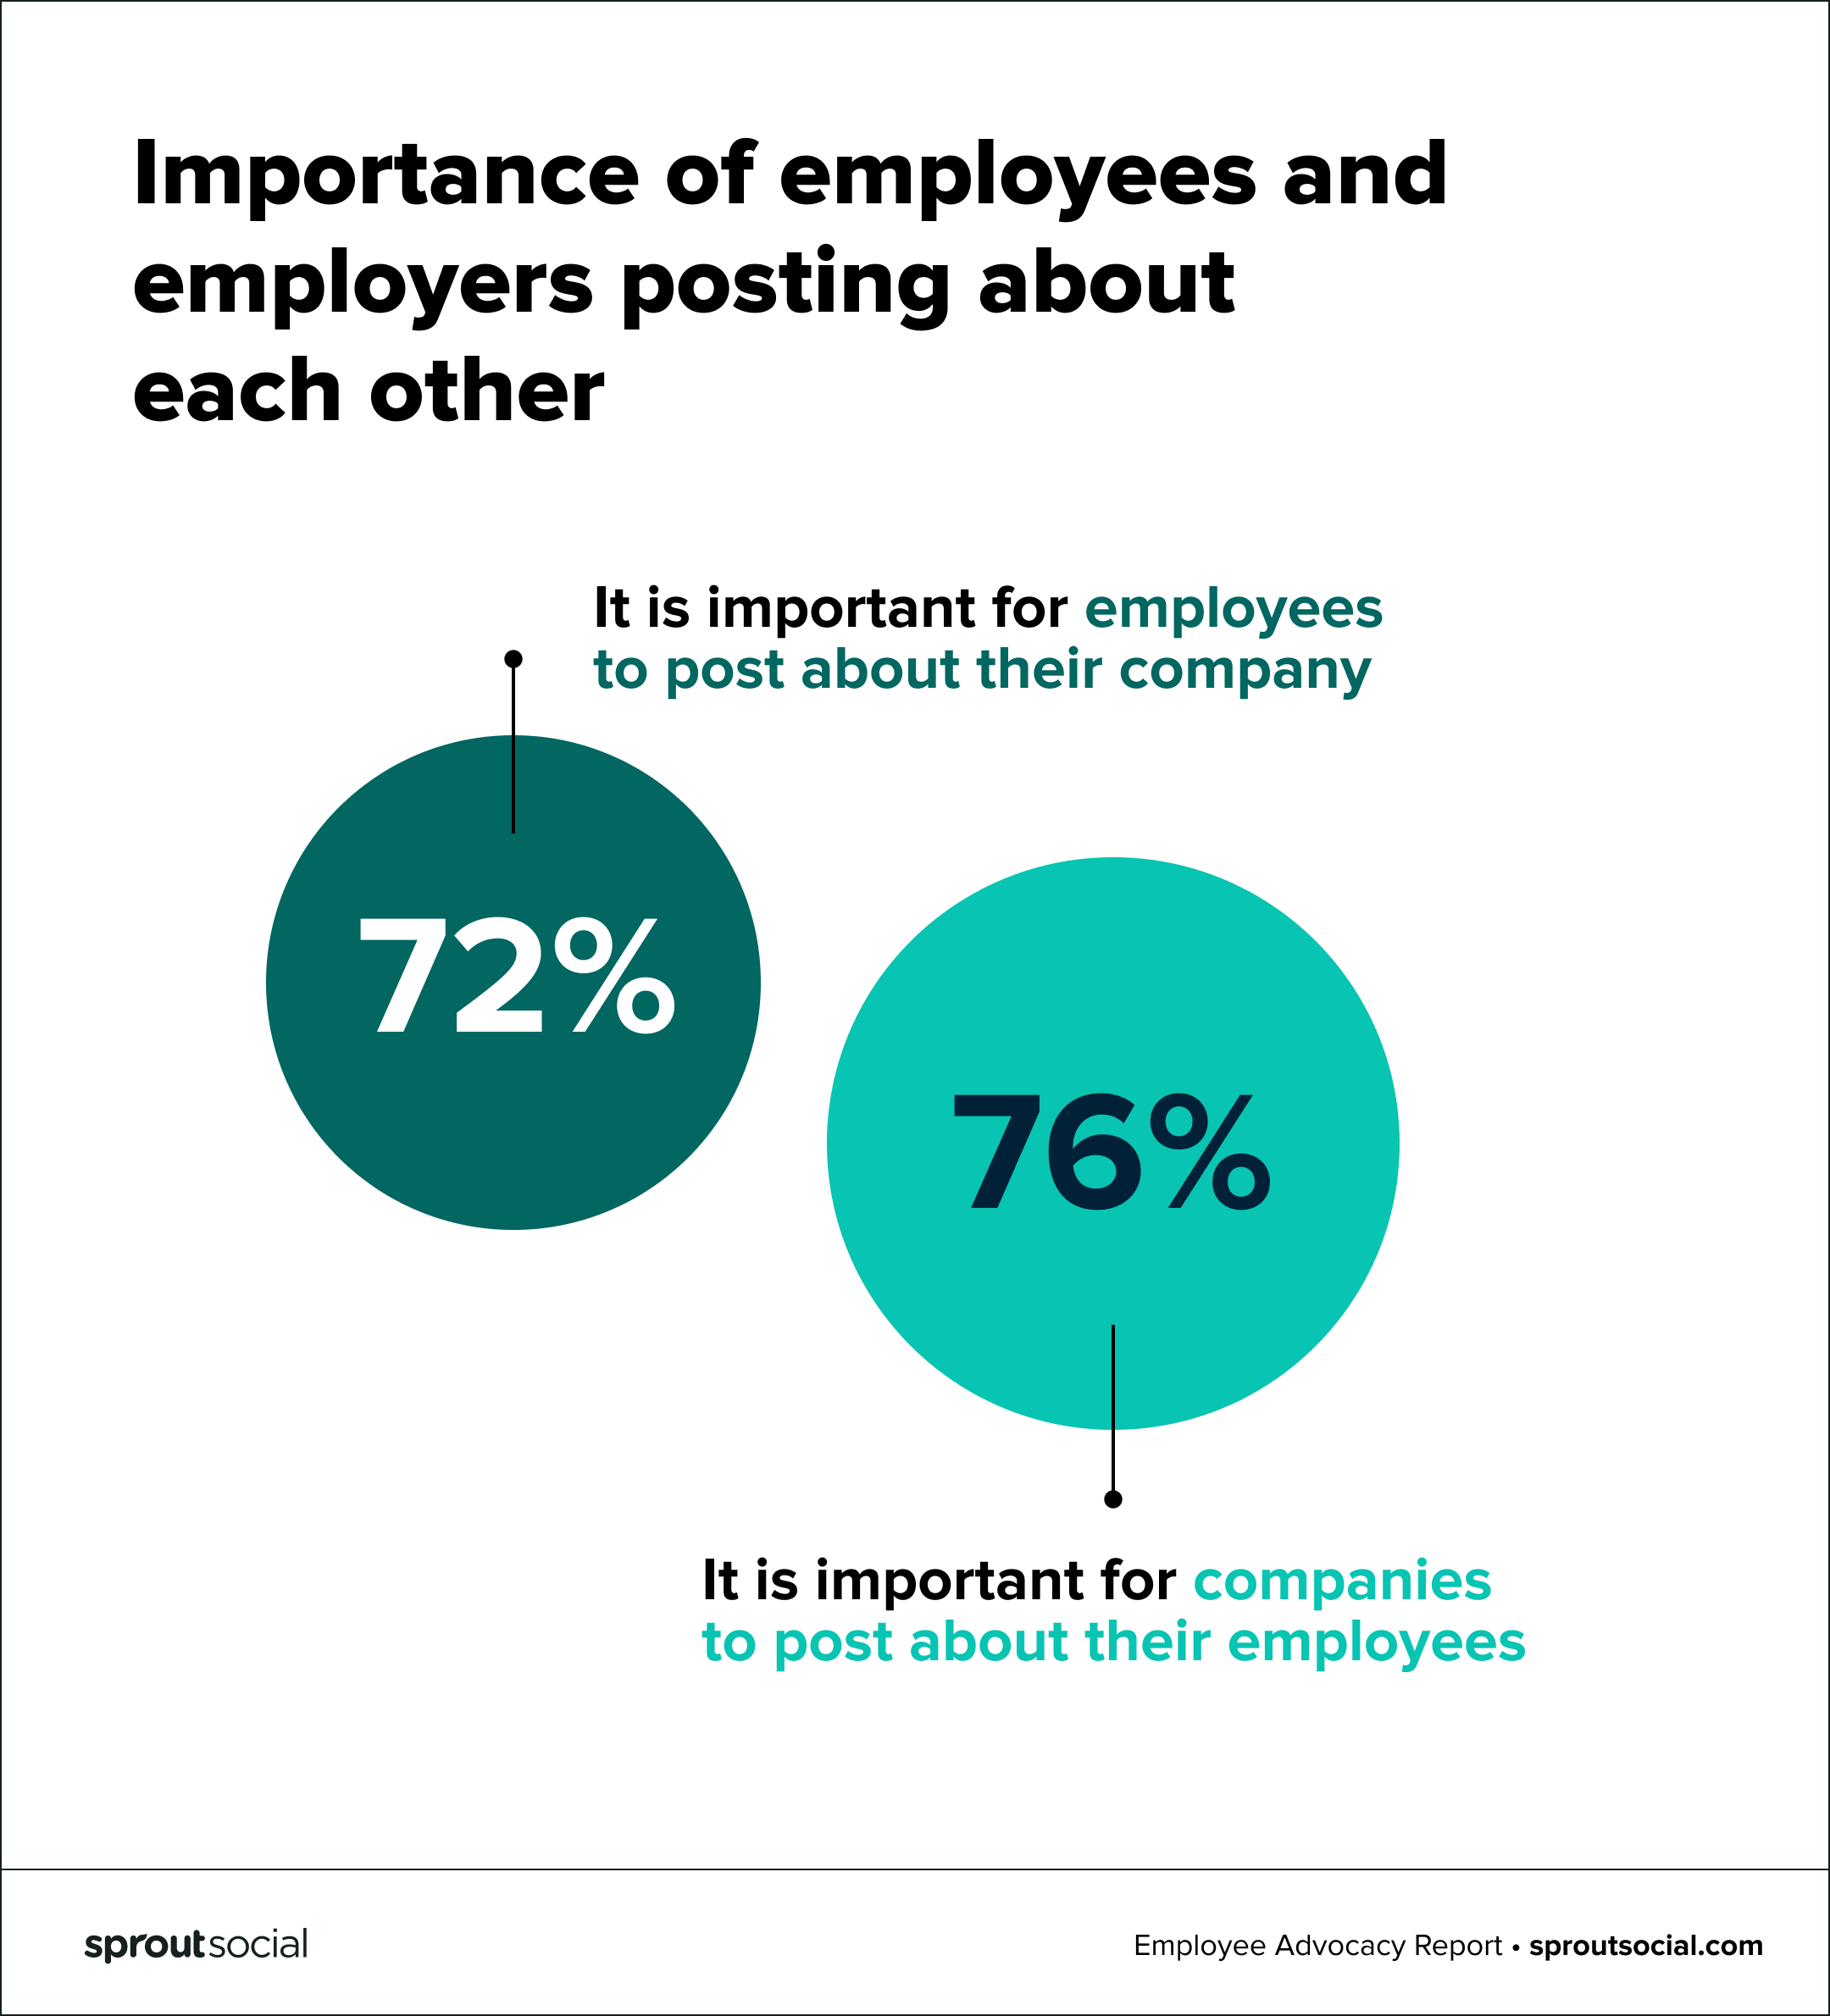 A data visualization explaining the importance of employees and employers posting about each other. The visualization lists two key stats: 1) 72% of engaged social media users say it’s important for employees to post about their company on social media. 2) 76% of engaged social media users say it’s important for companies to post about their employees on social media. 